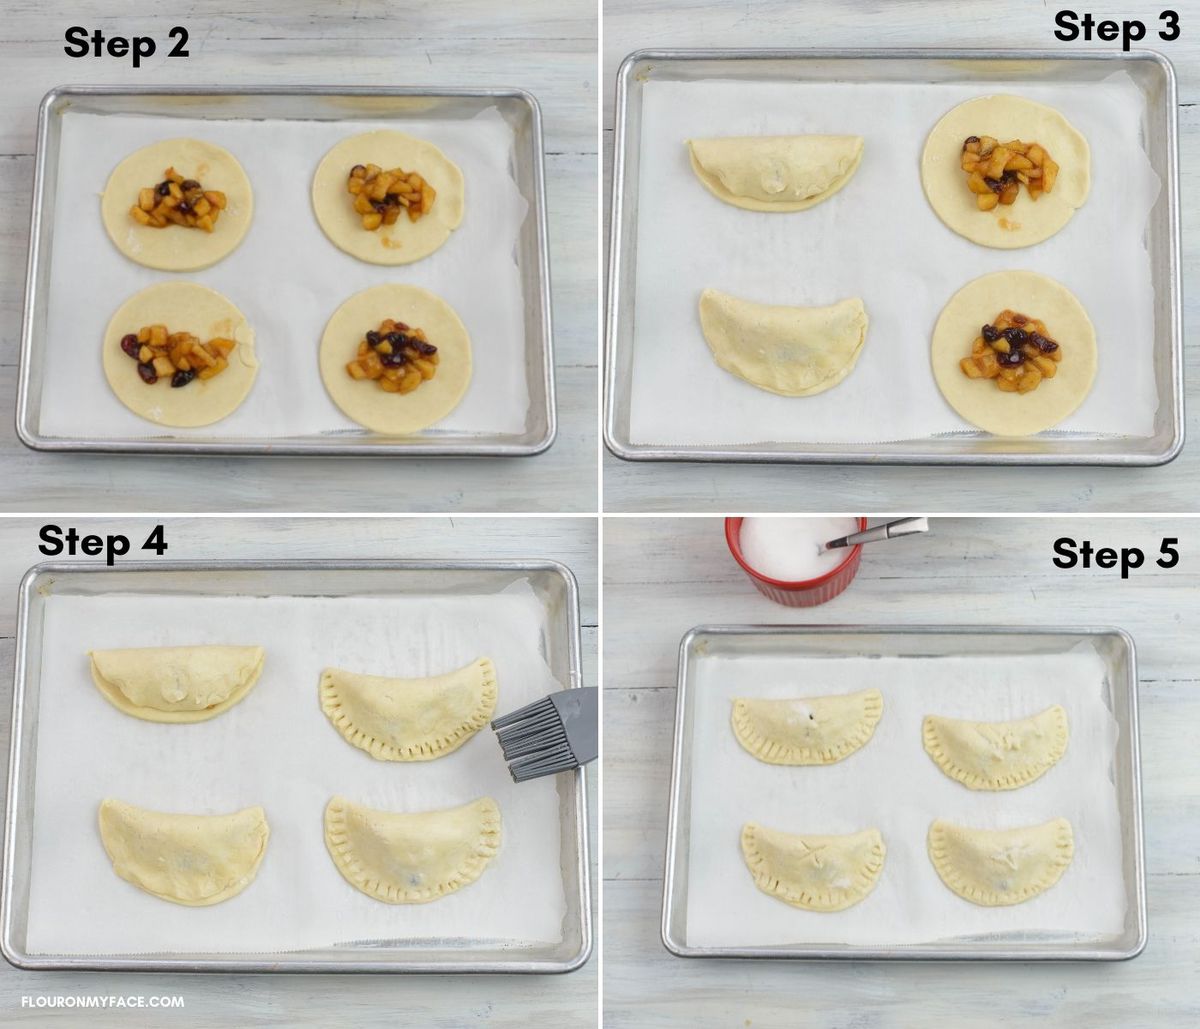 Steps showing how to fold the filling into turnover dough.